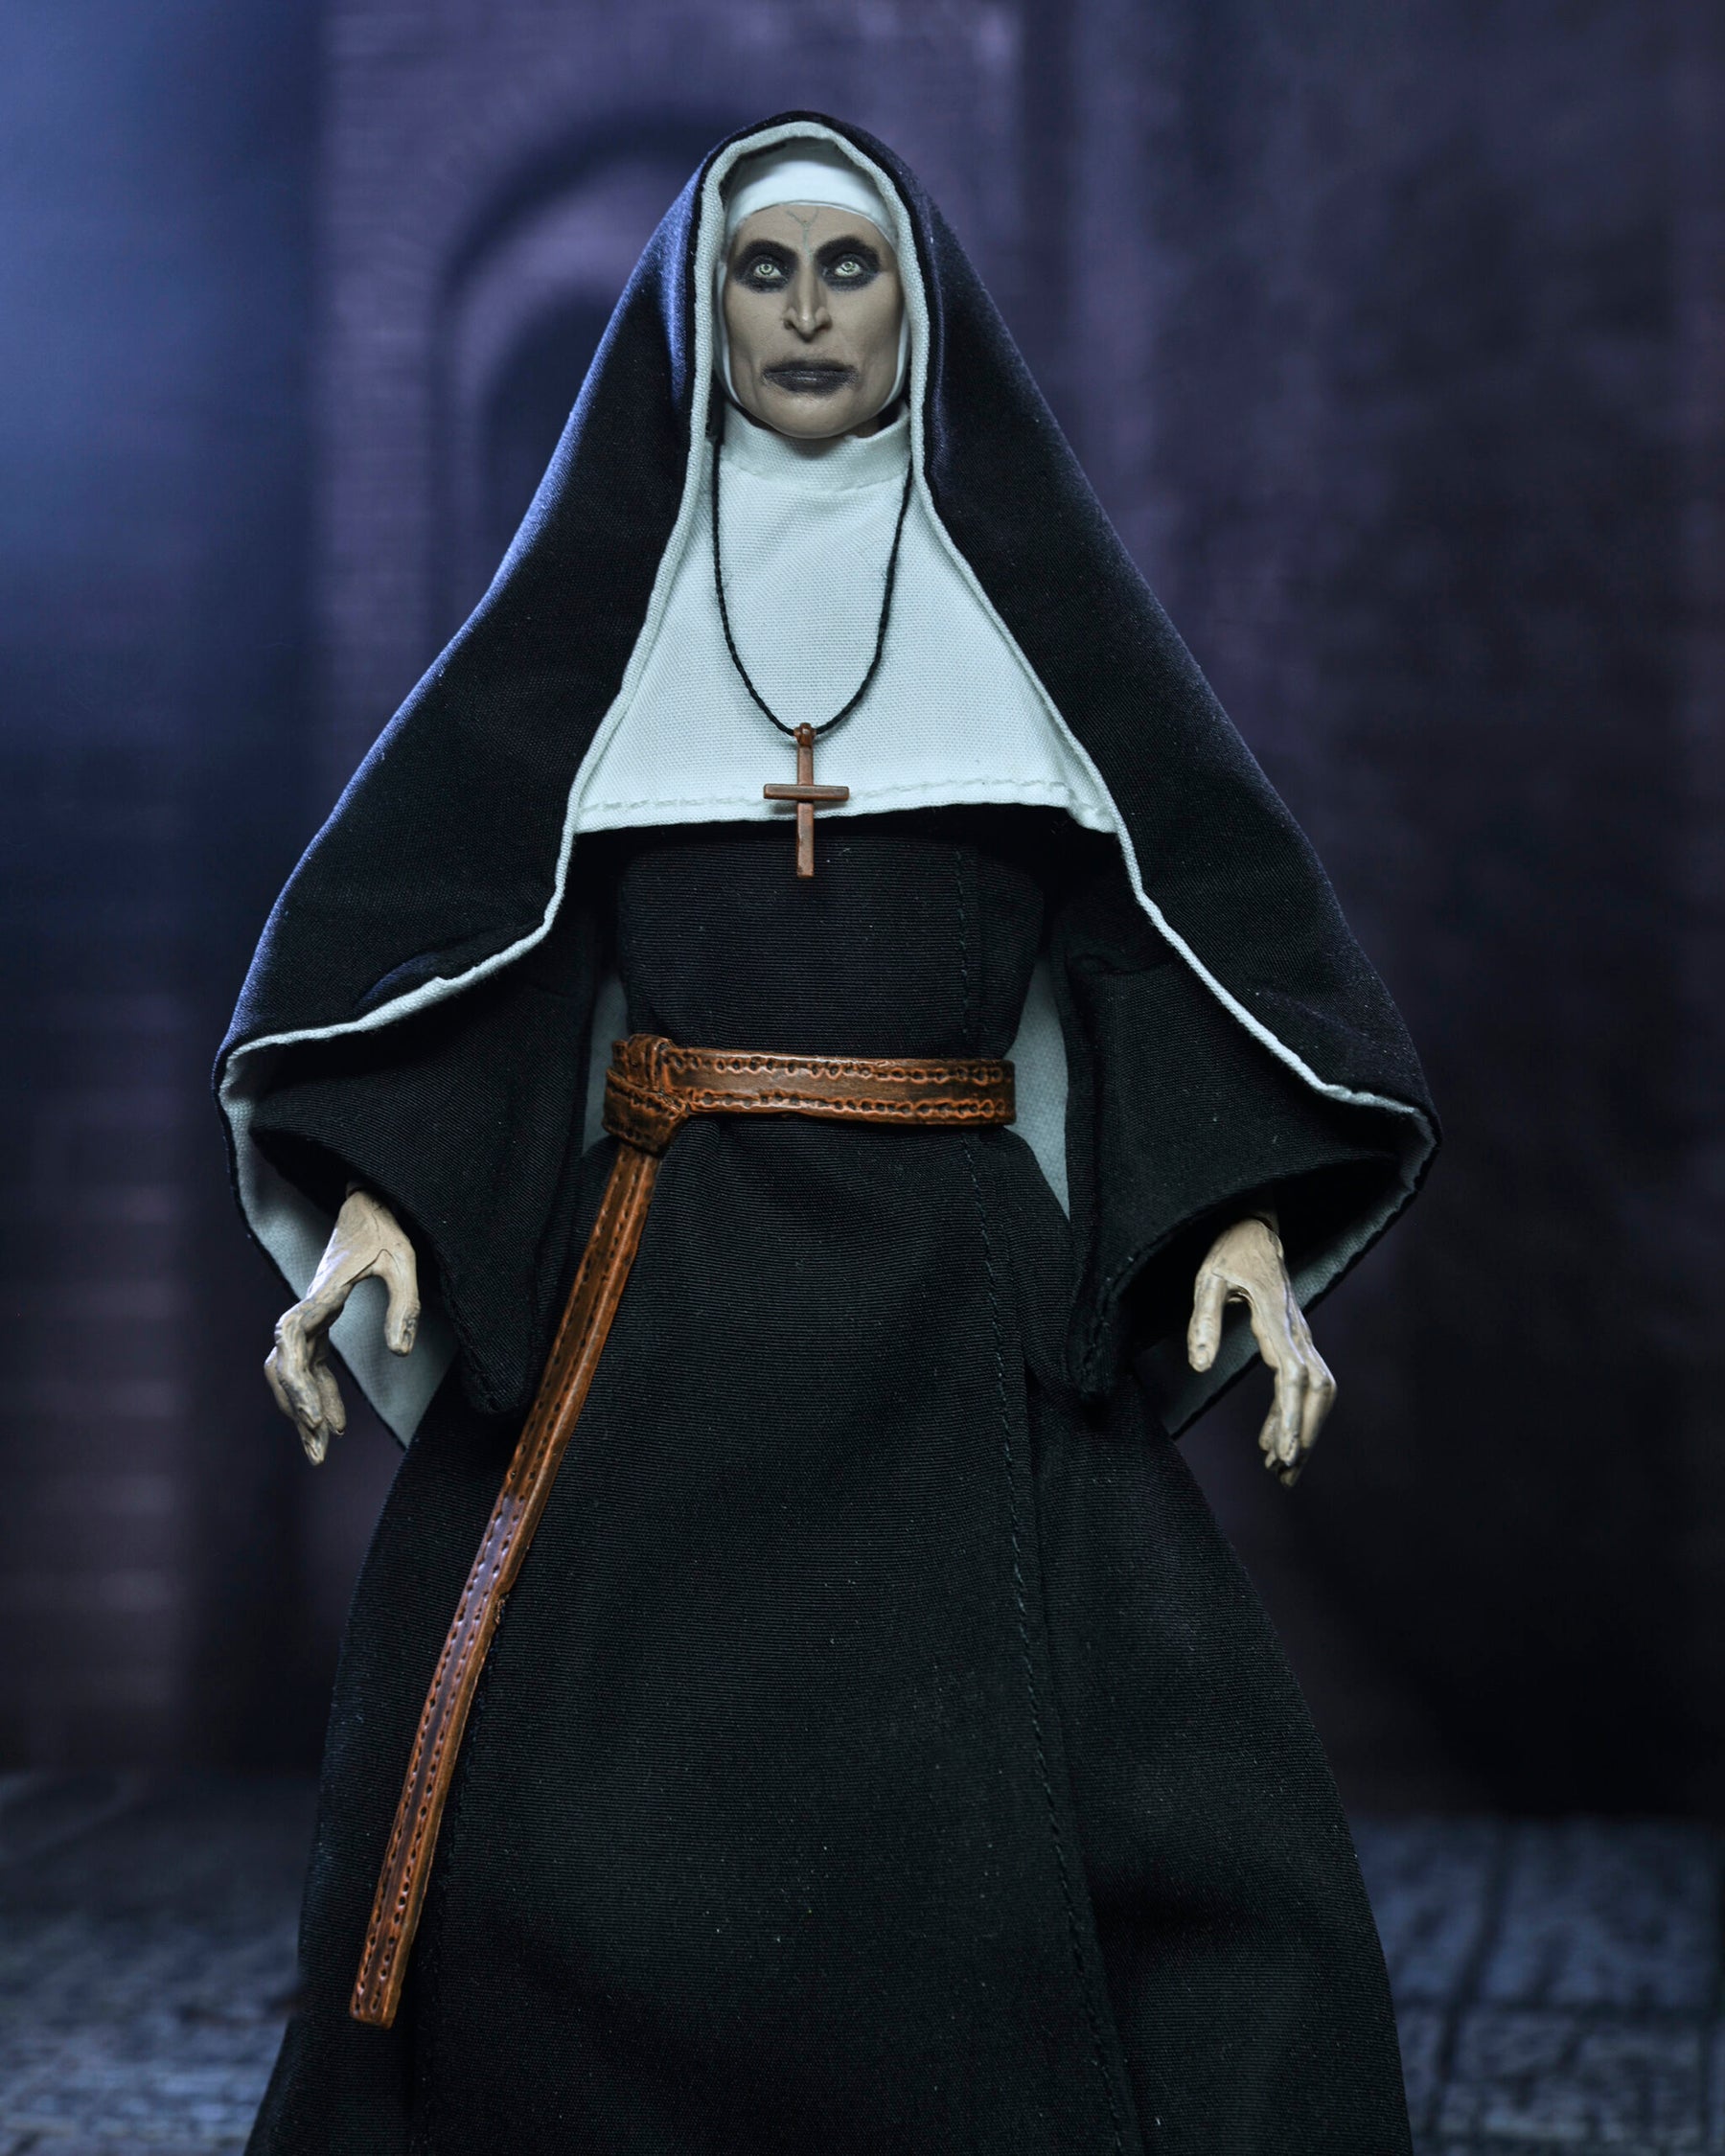 NECA - The Conjuring Universe - Ultimate Valak (The Nun) 7" Action Figure